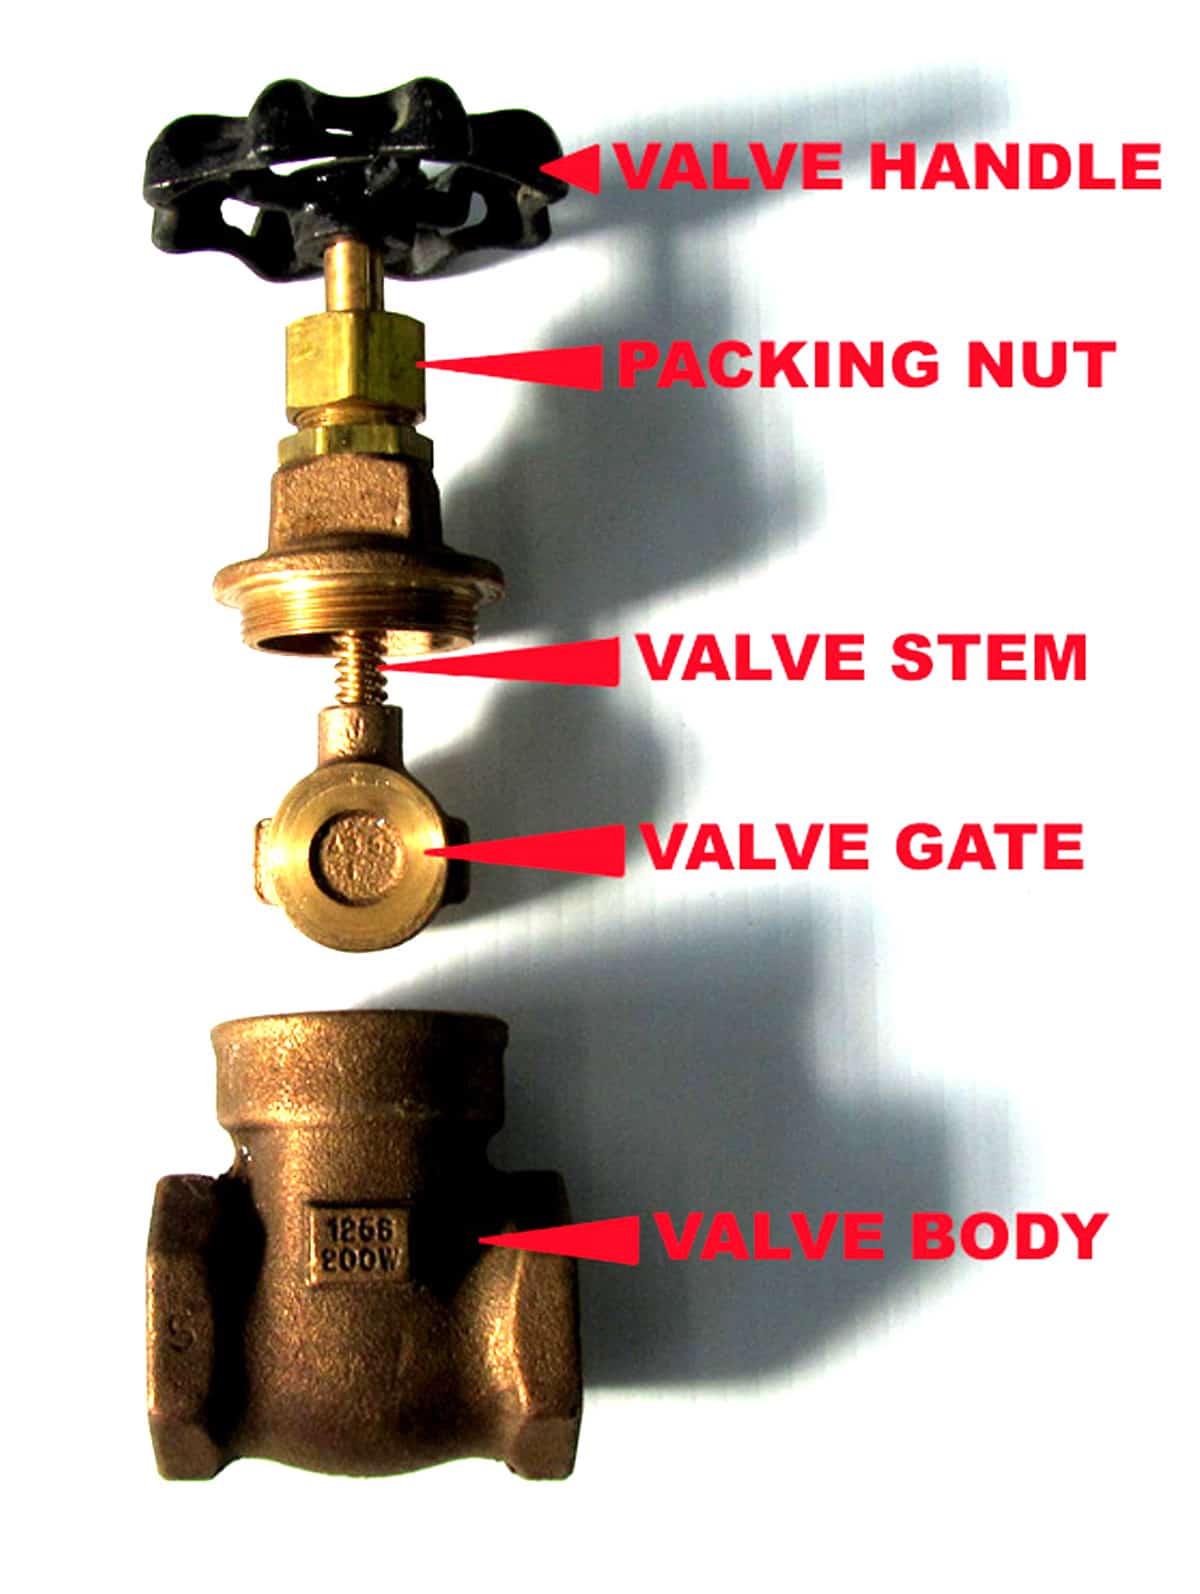 Water valve replacement components for a brass gate valve.